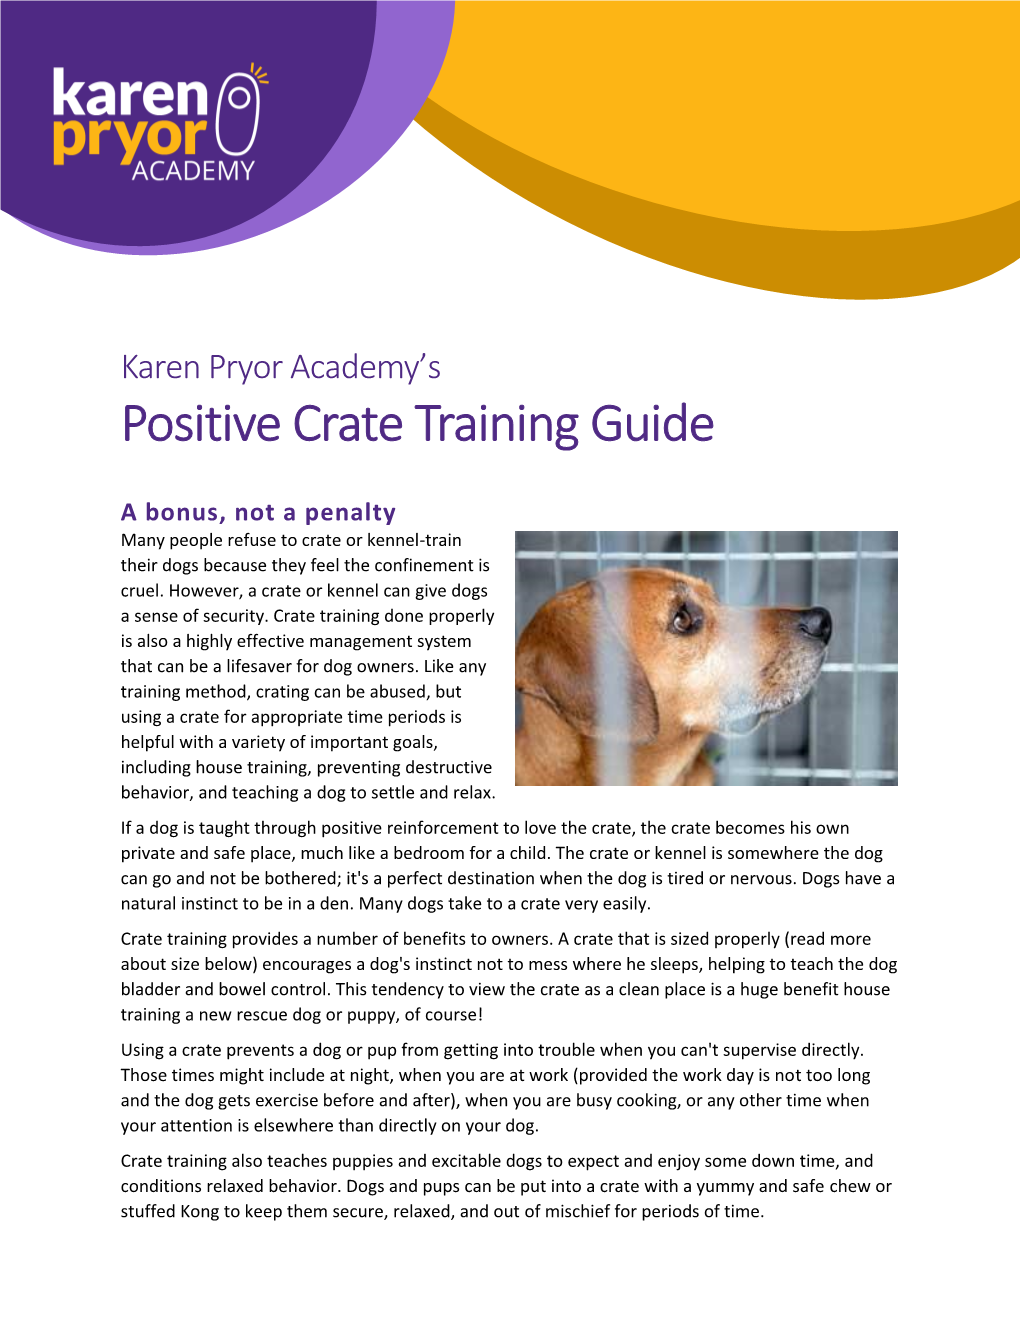 Positive Crate Training Guide